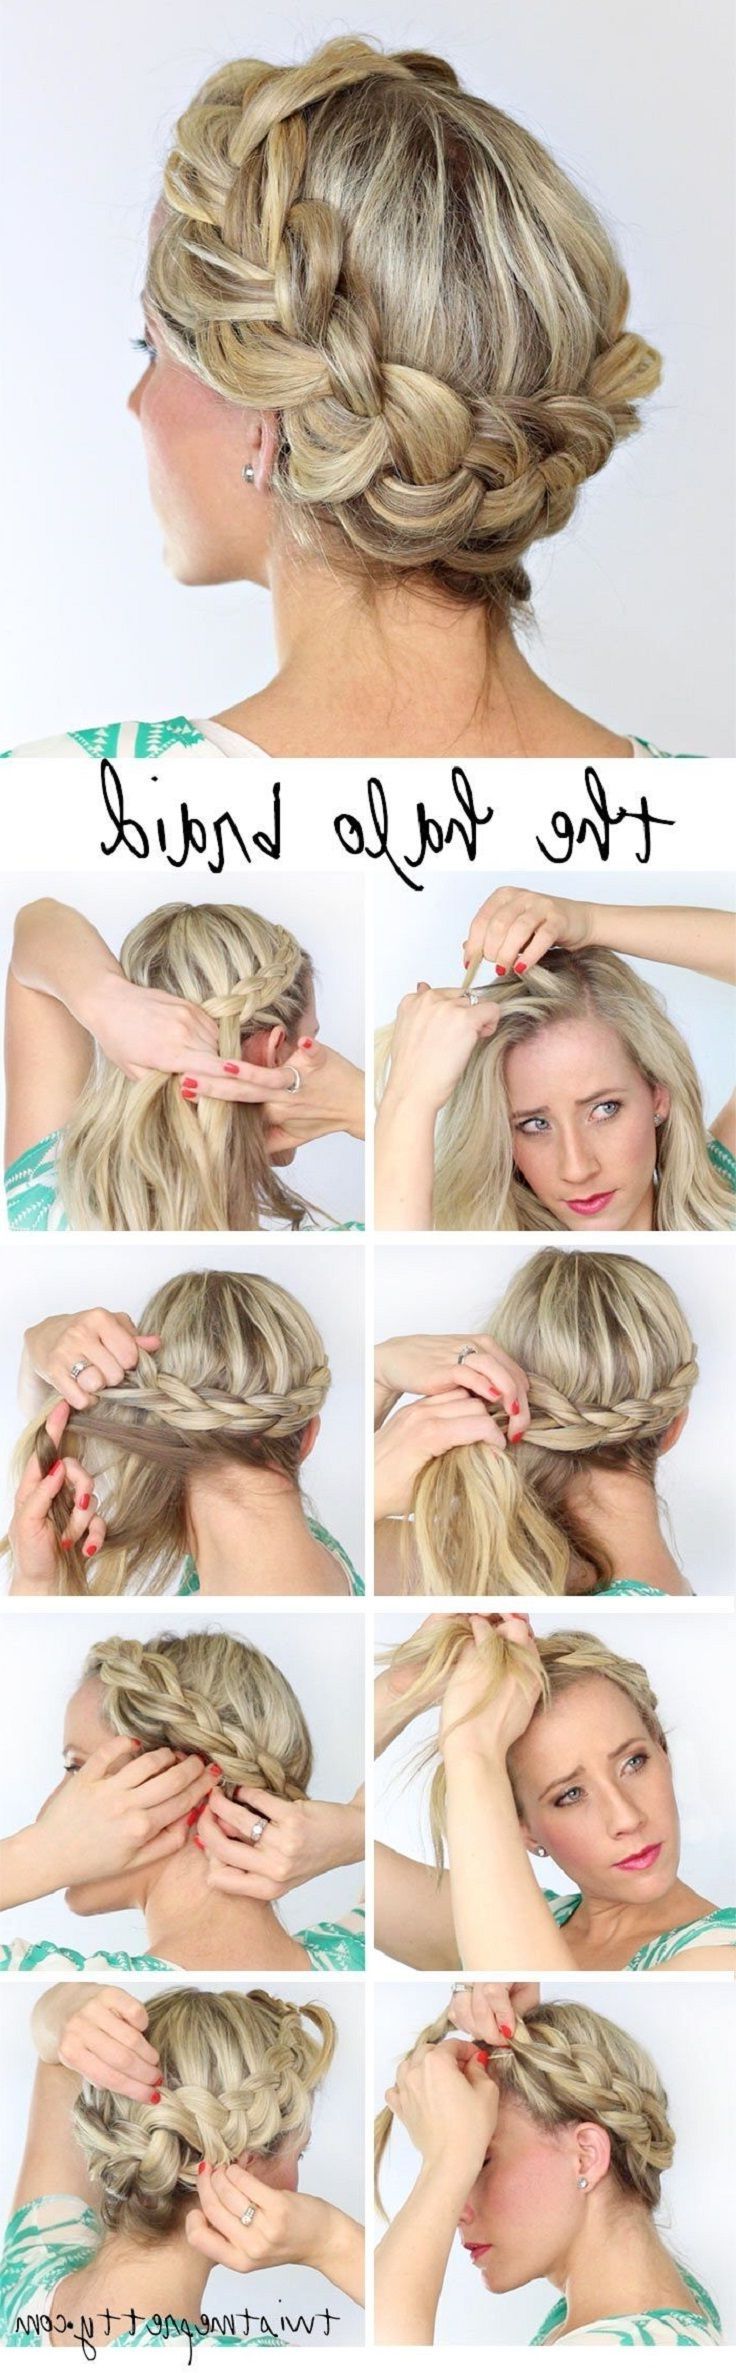 Top 10 Messy Braided Hairstyle Tutorials To Be Stylish This Fall Throughout Well Known Messy Braid Hairstyles (View 13 of 15)